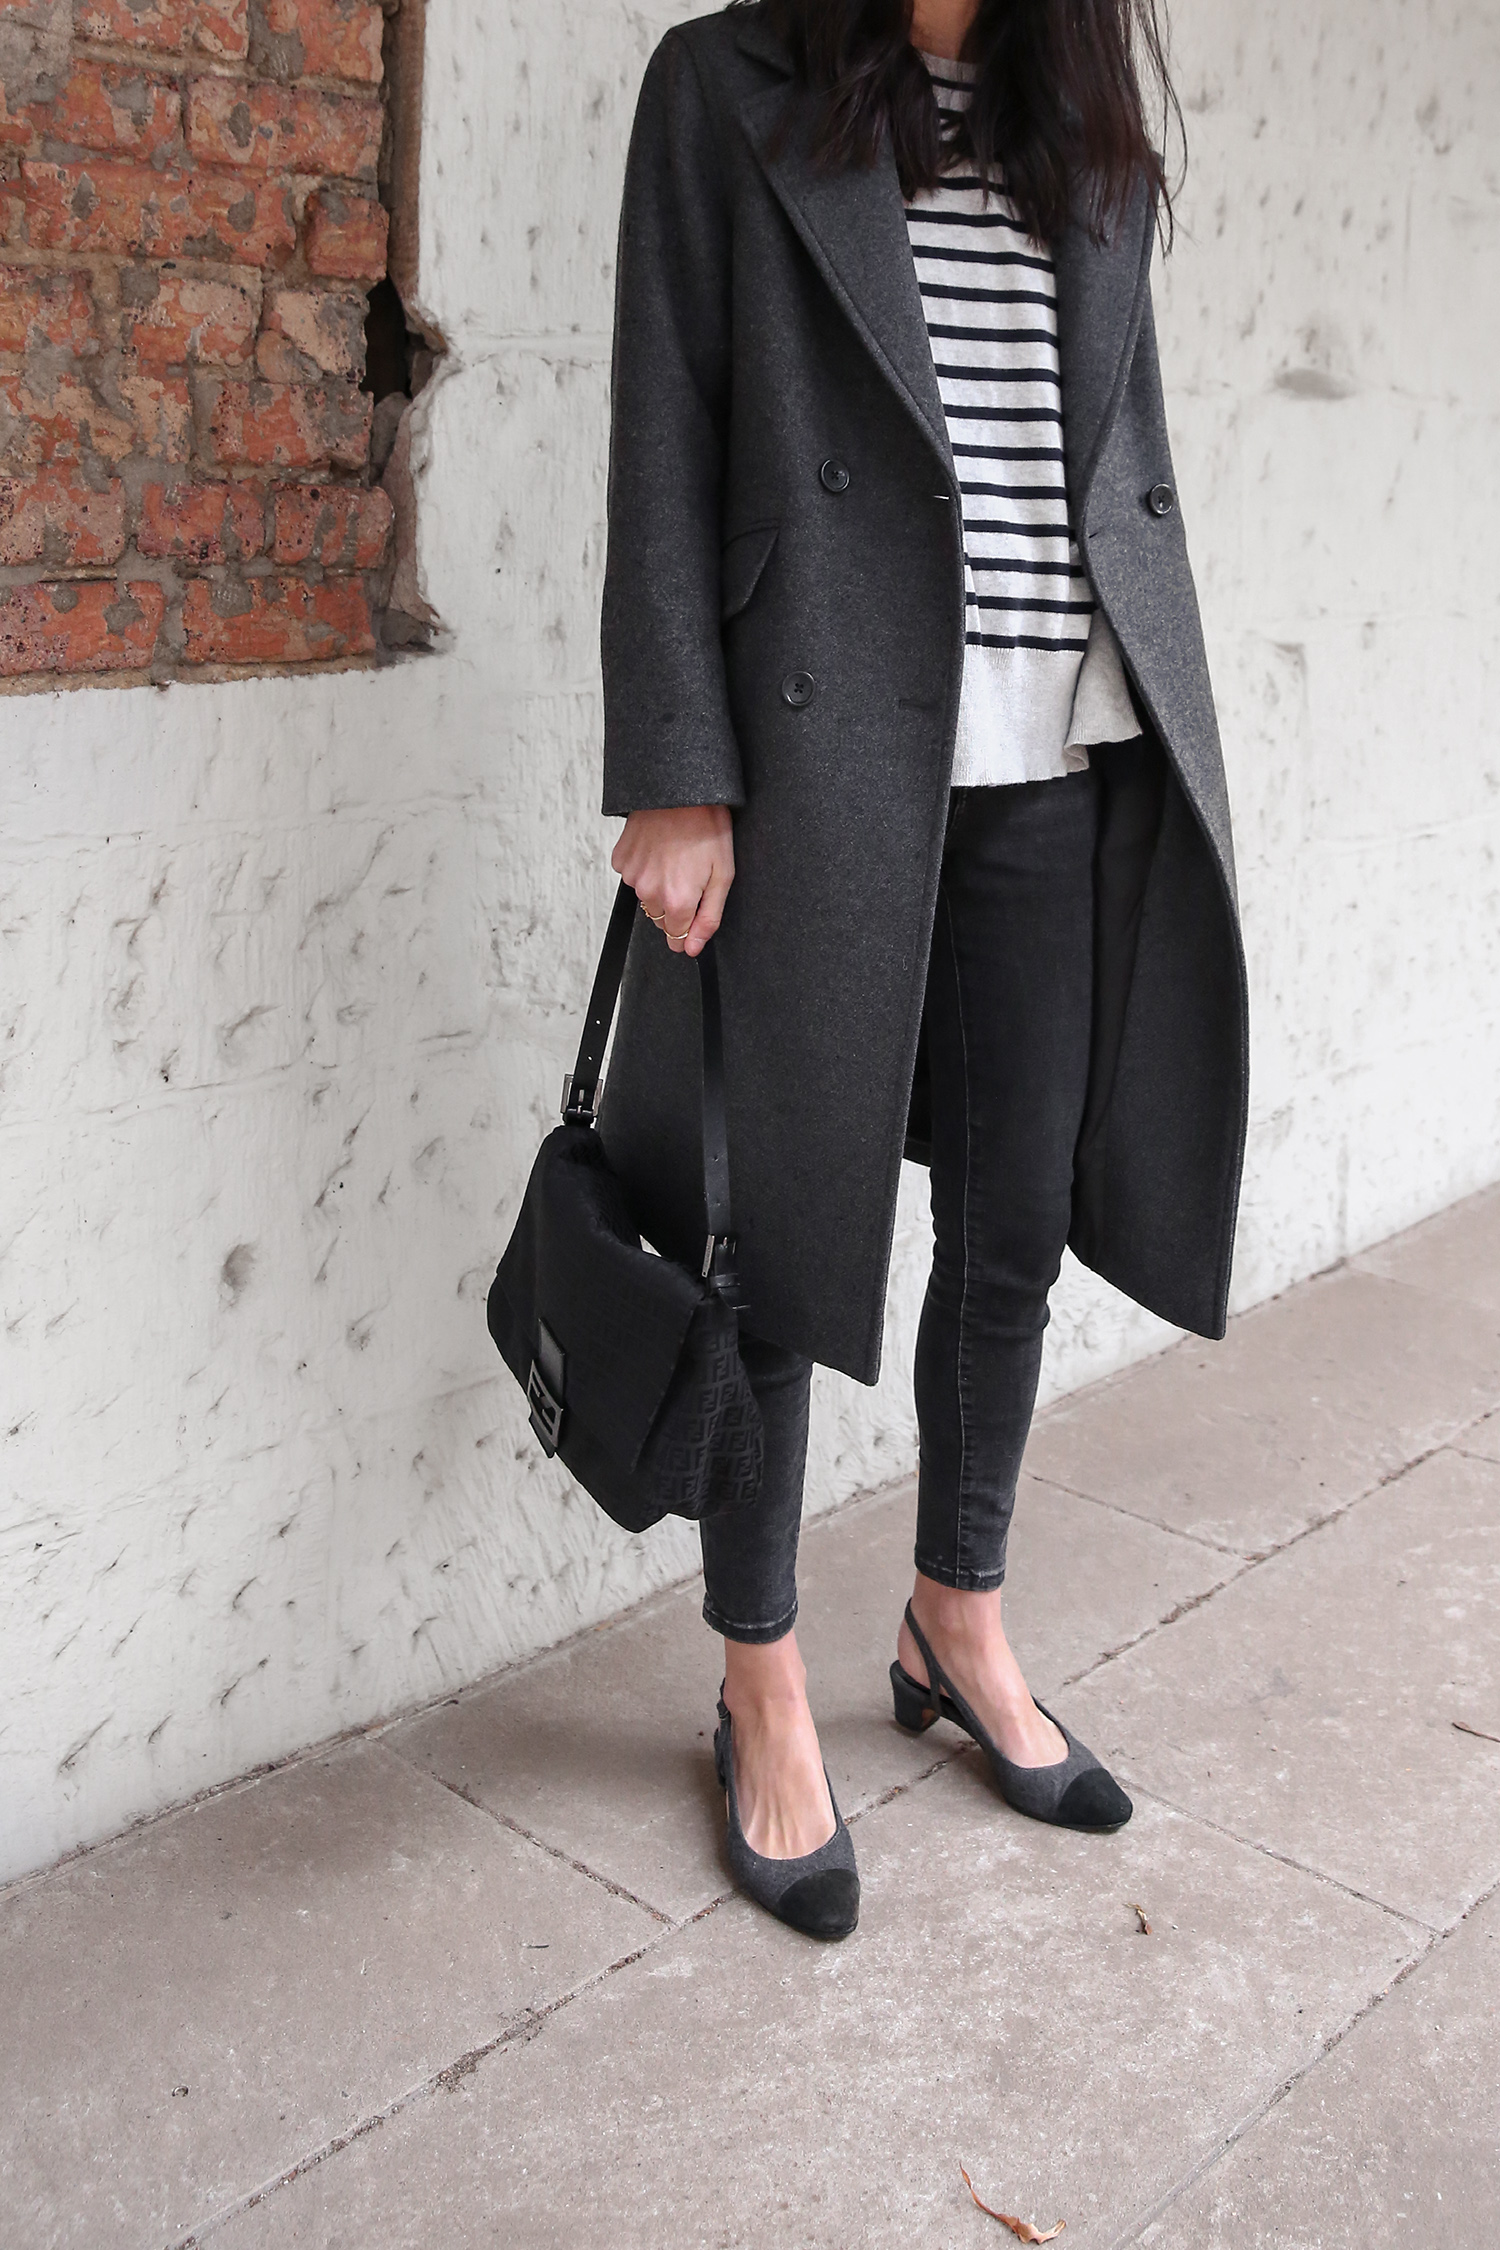 Scandi style minimal outfit how to wear stripes